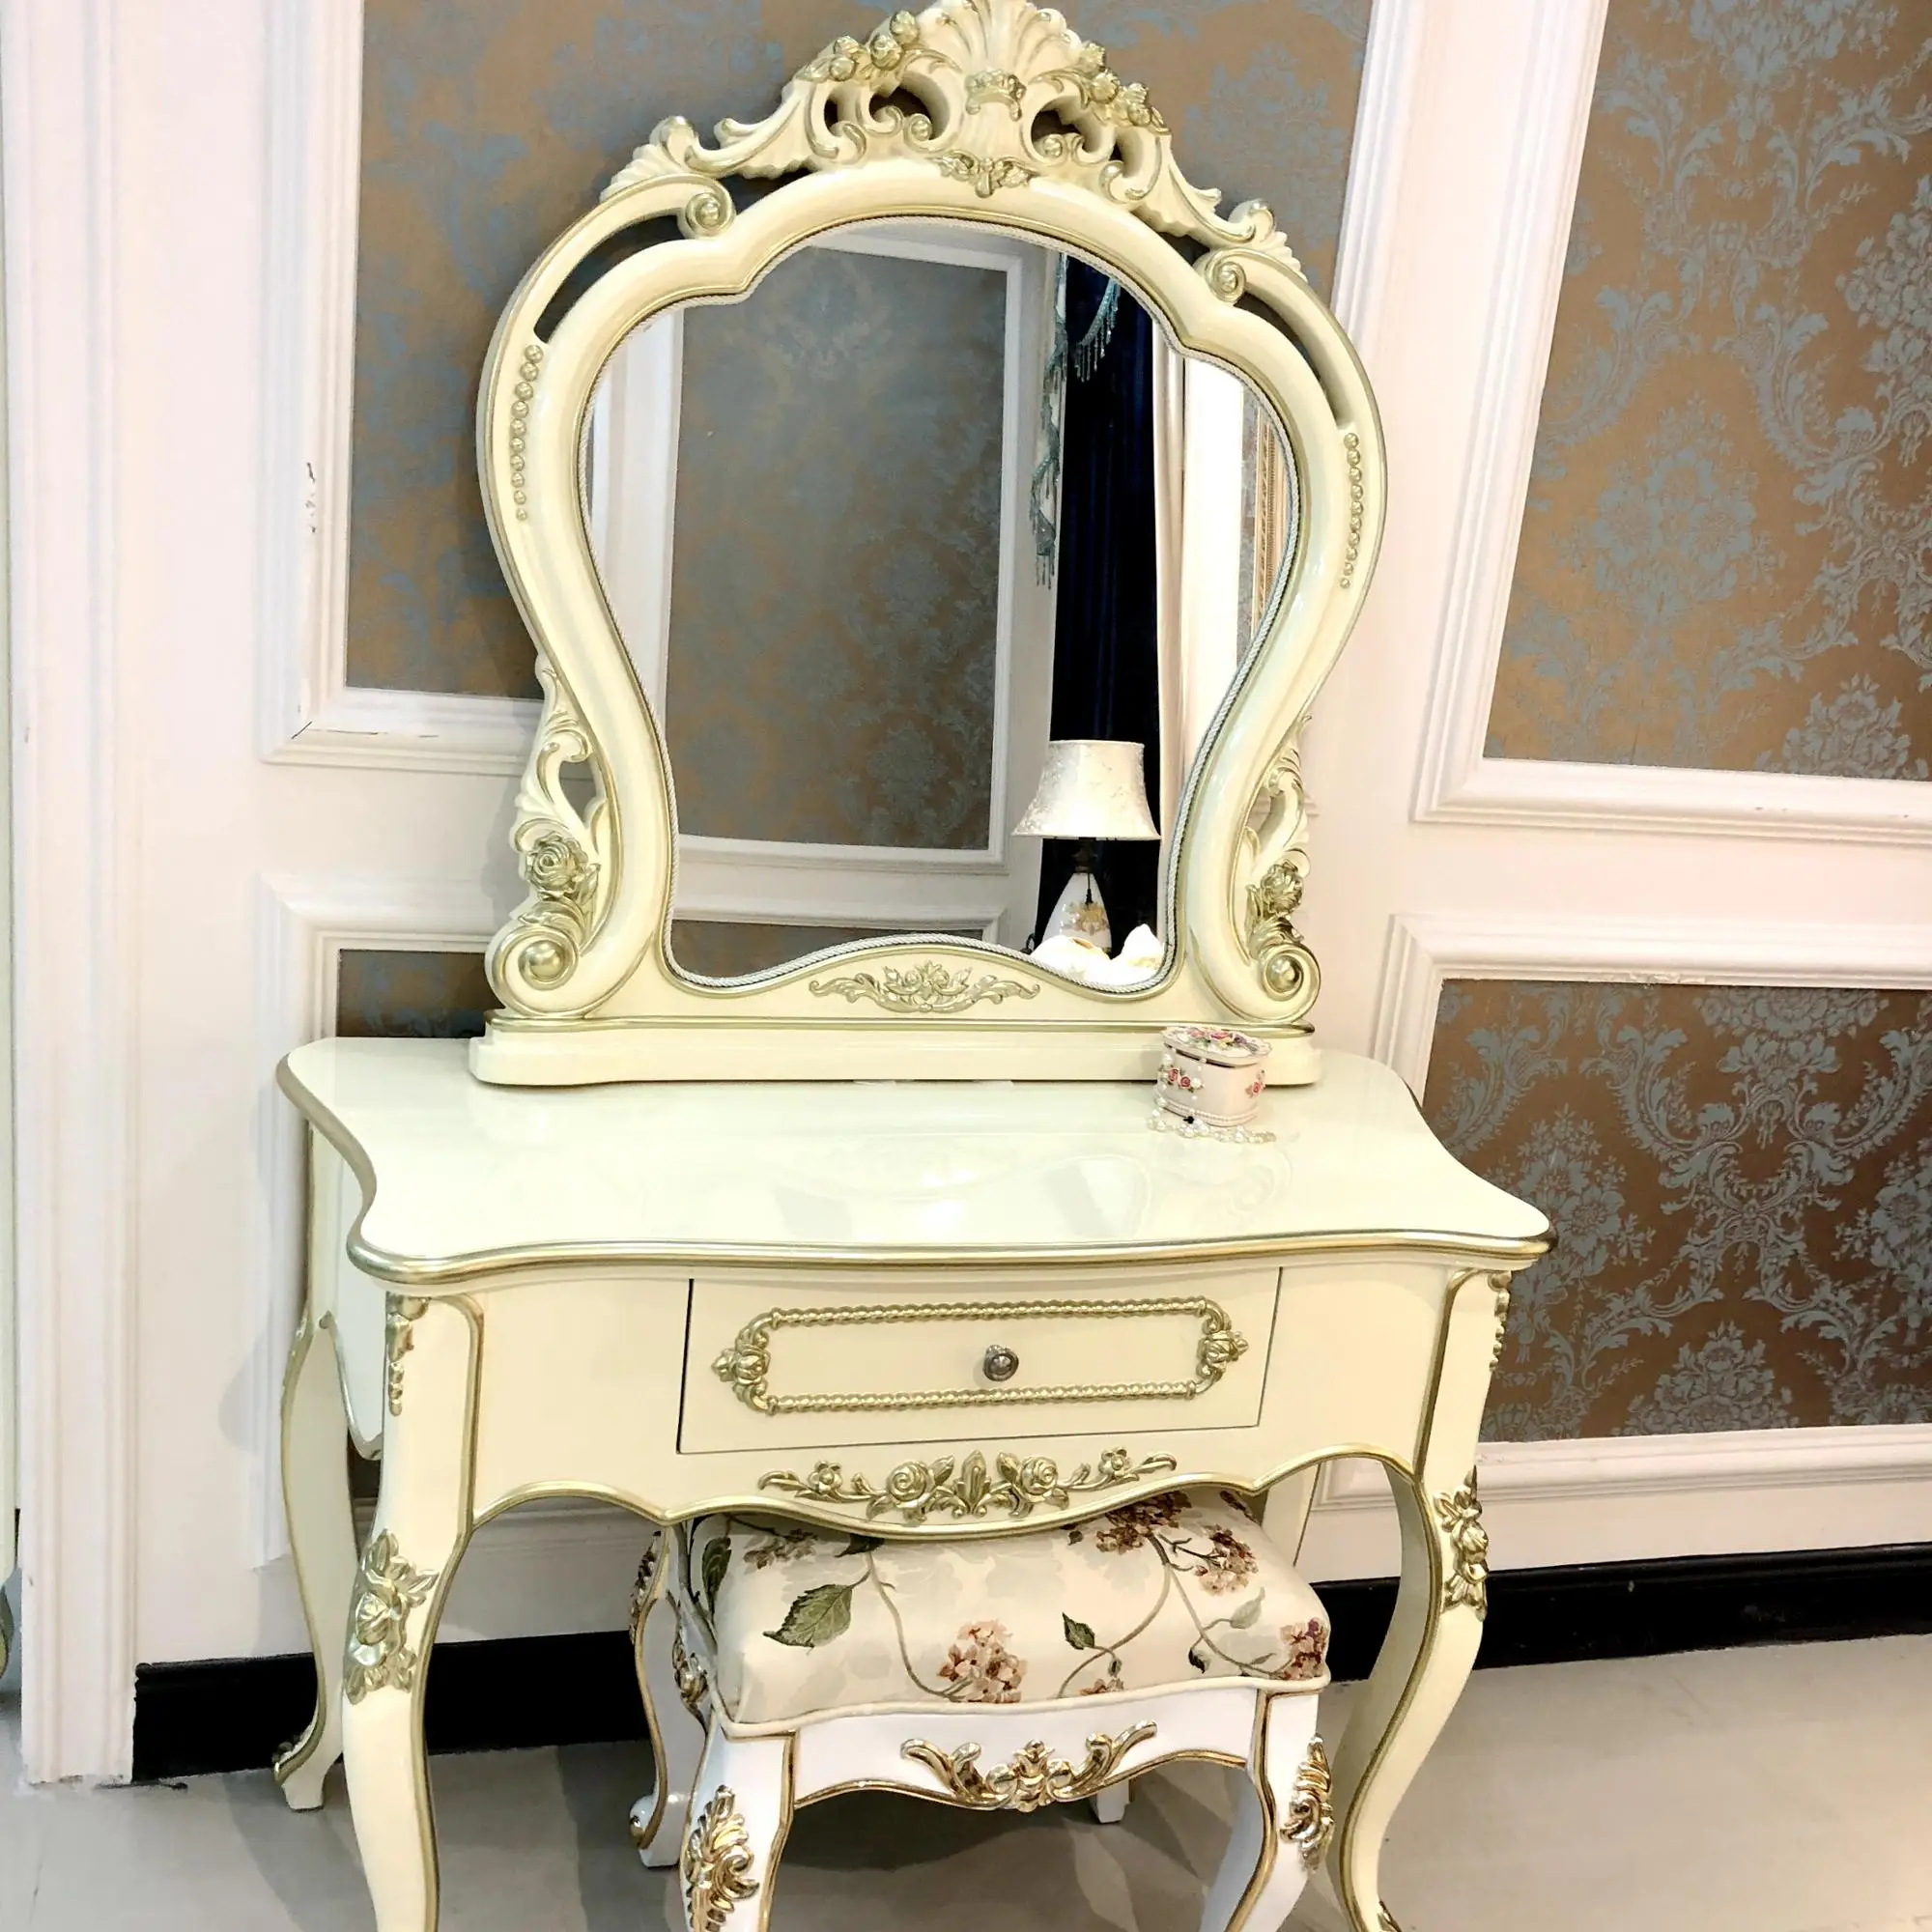 Hot Sale Bedroom Decorative Curved Mirror Dresser With Chair View